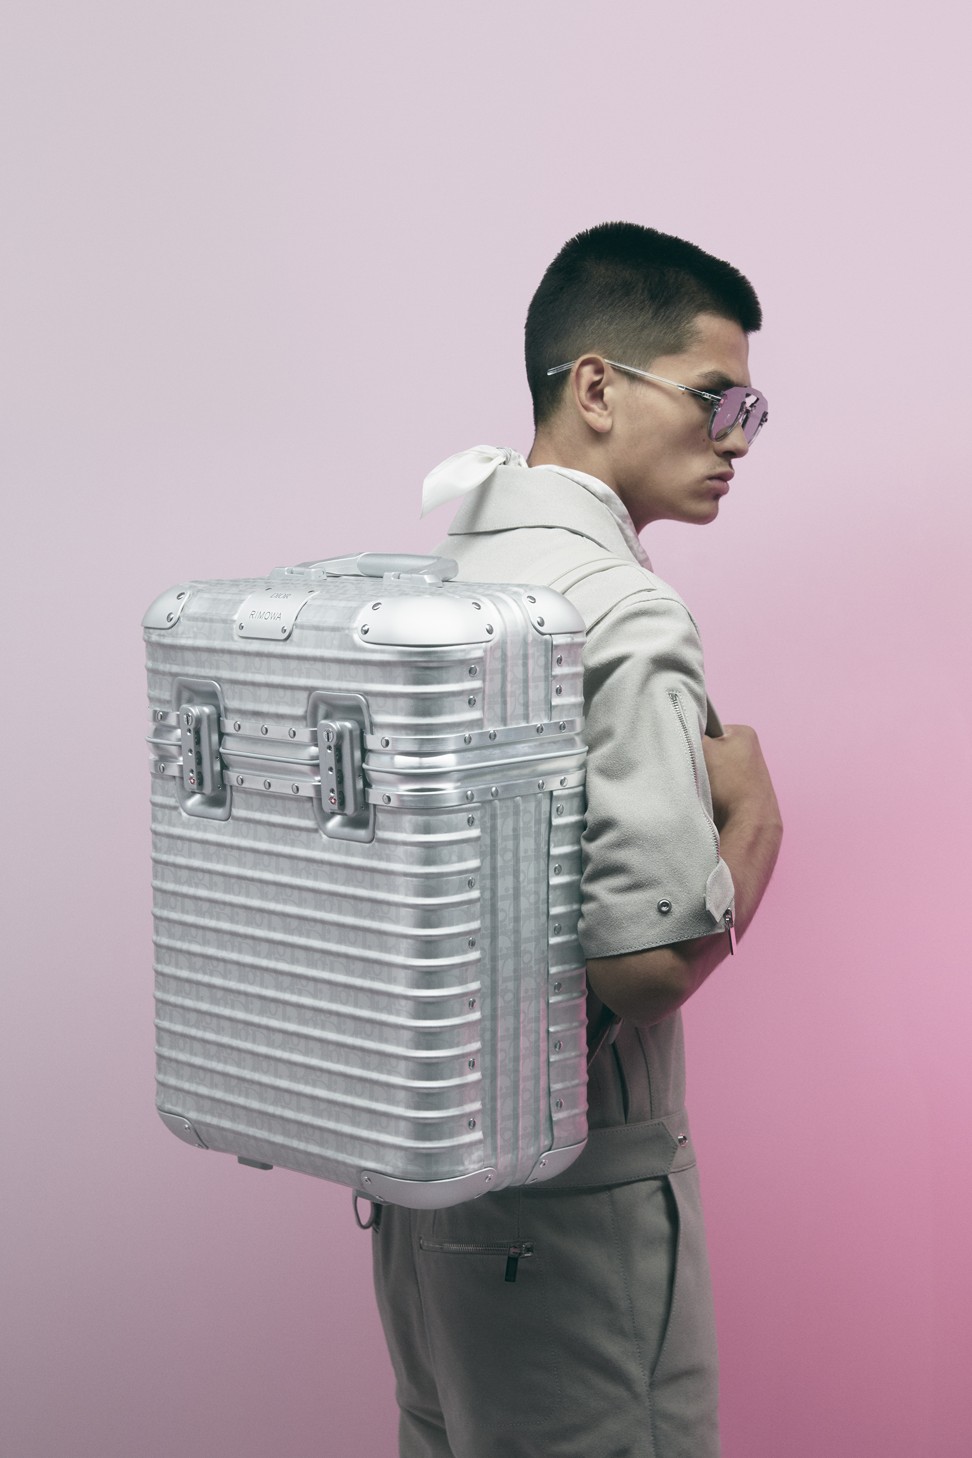 LVMH's Luxury Luggage Brand Rimowa Aims Beyond Suitcases - Bloomberg